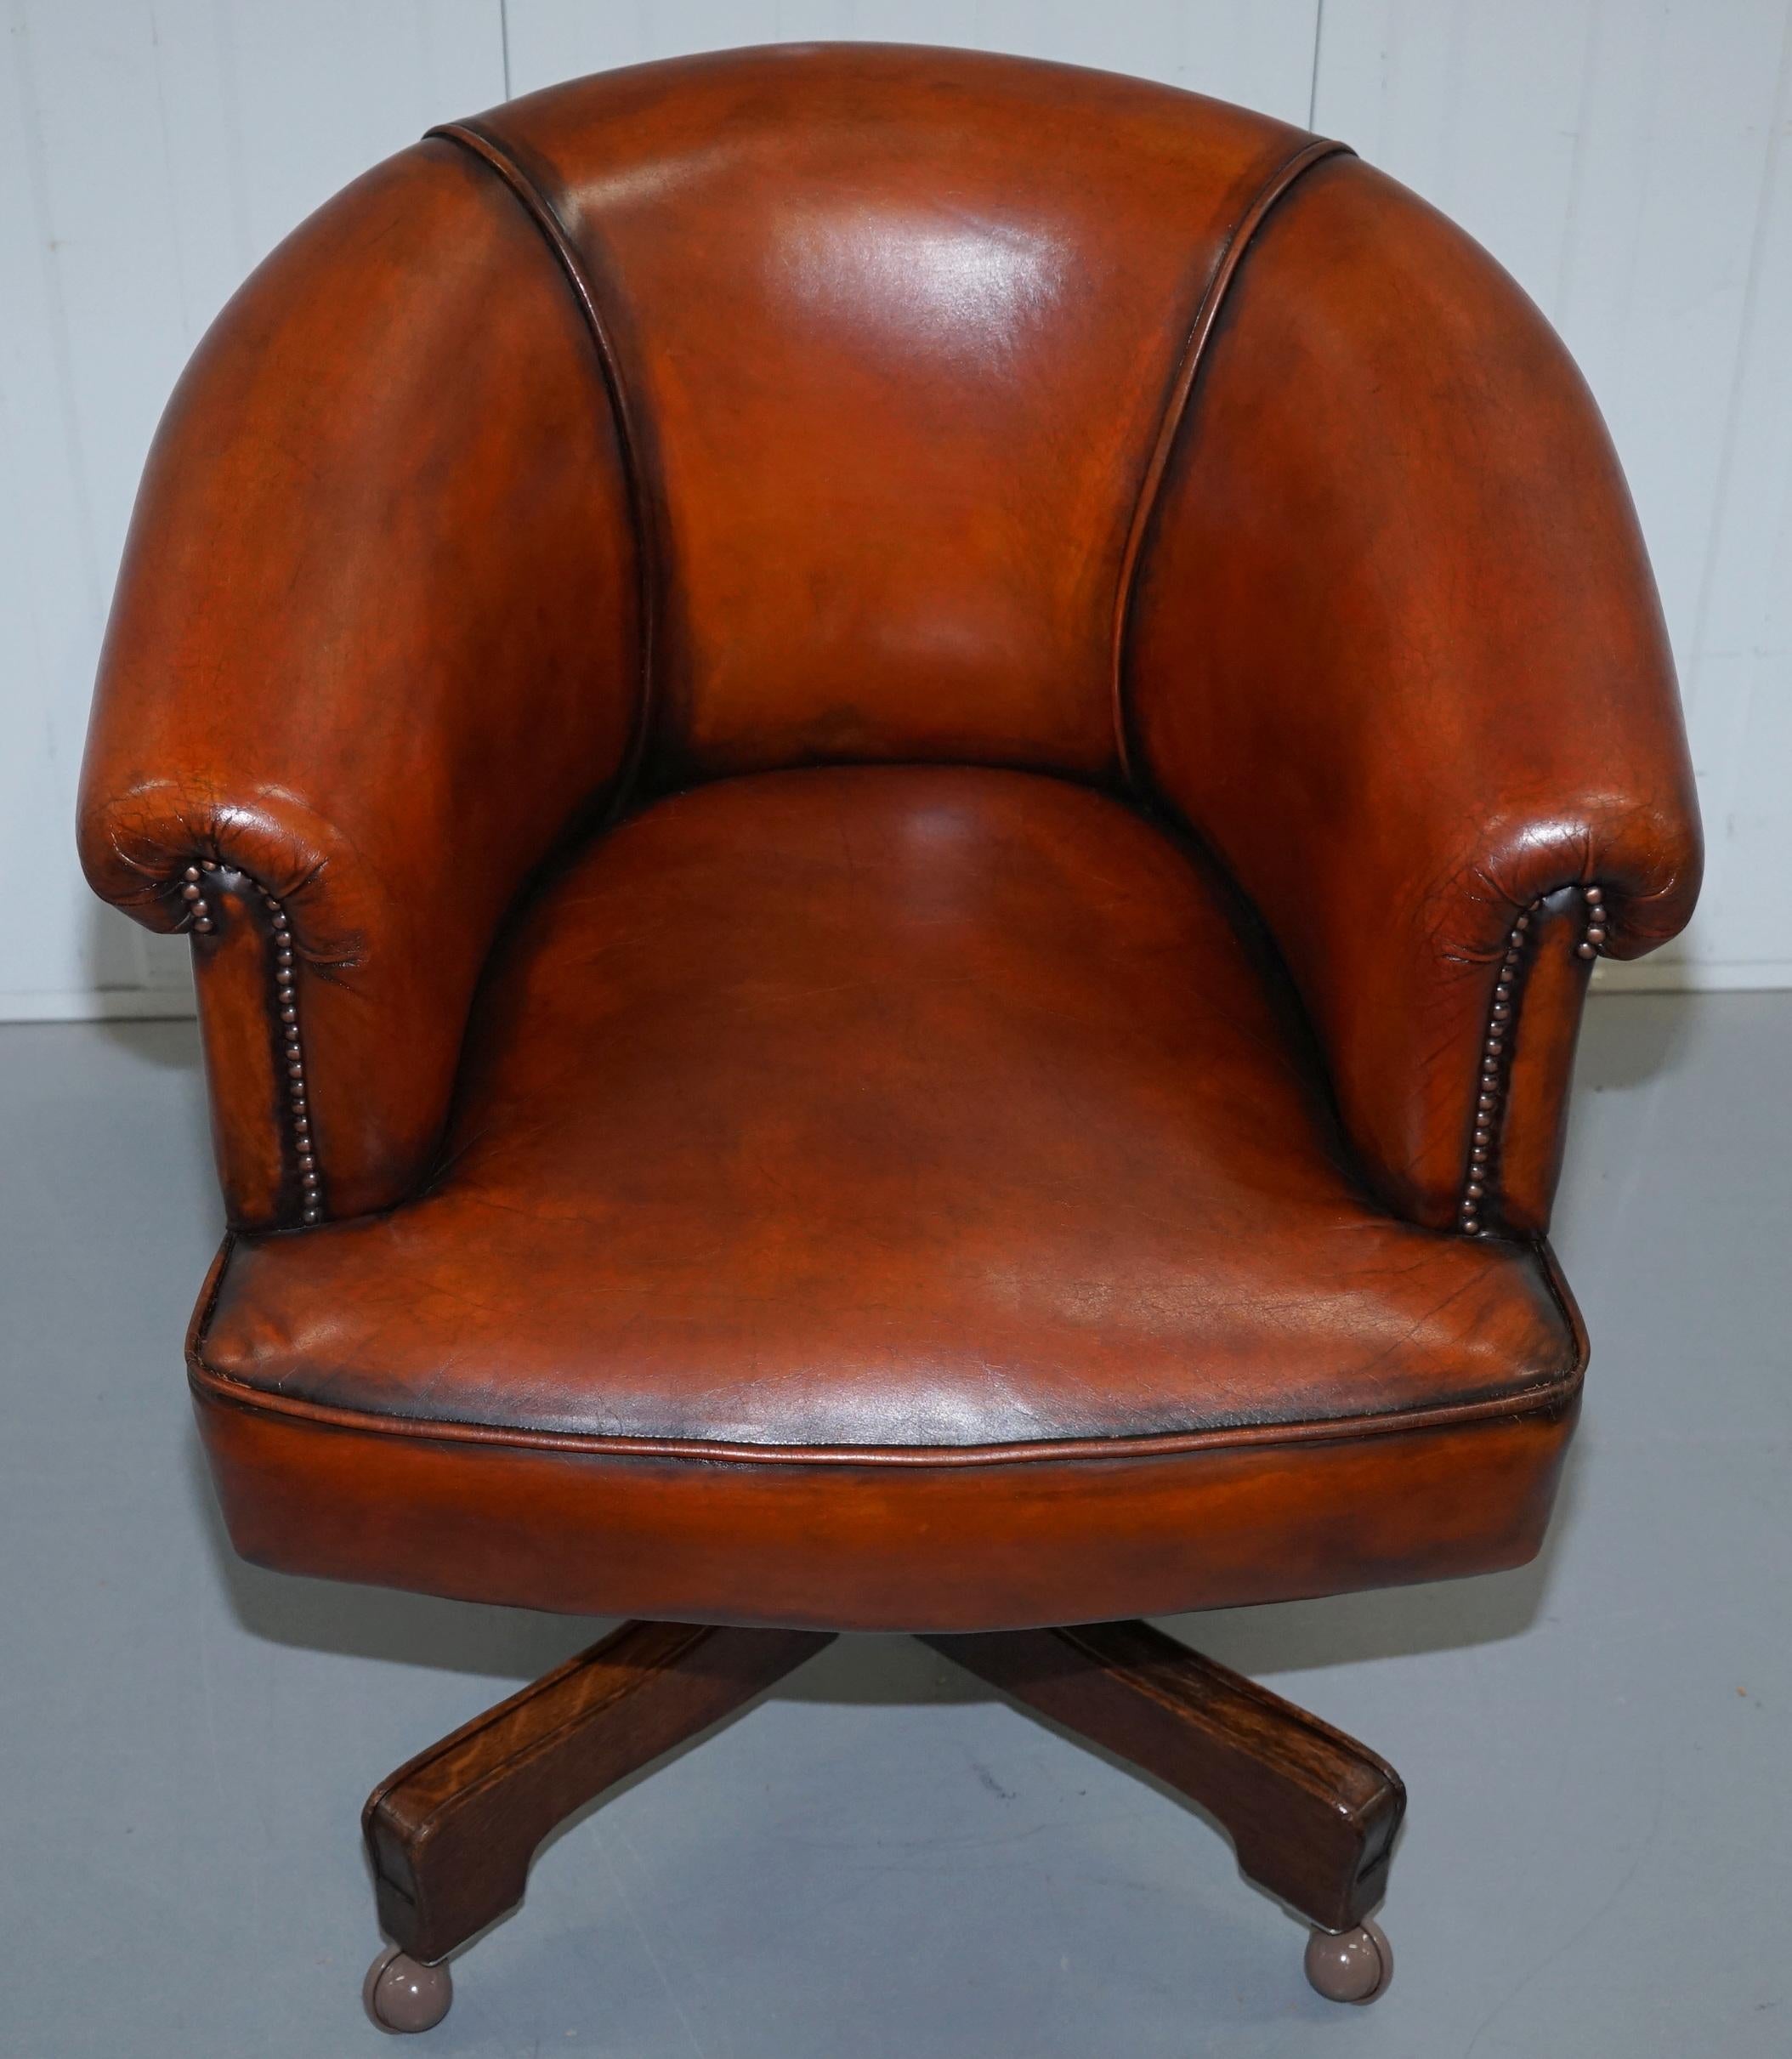 Hand-Crafted Very Early Rare Victorian Captains Chair Fully Restored Hand Dyed Brown Leather